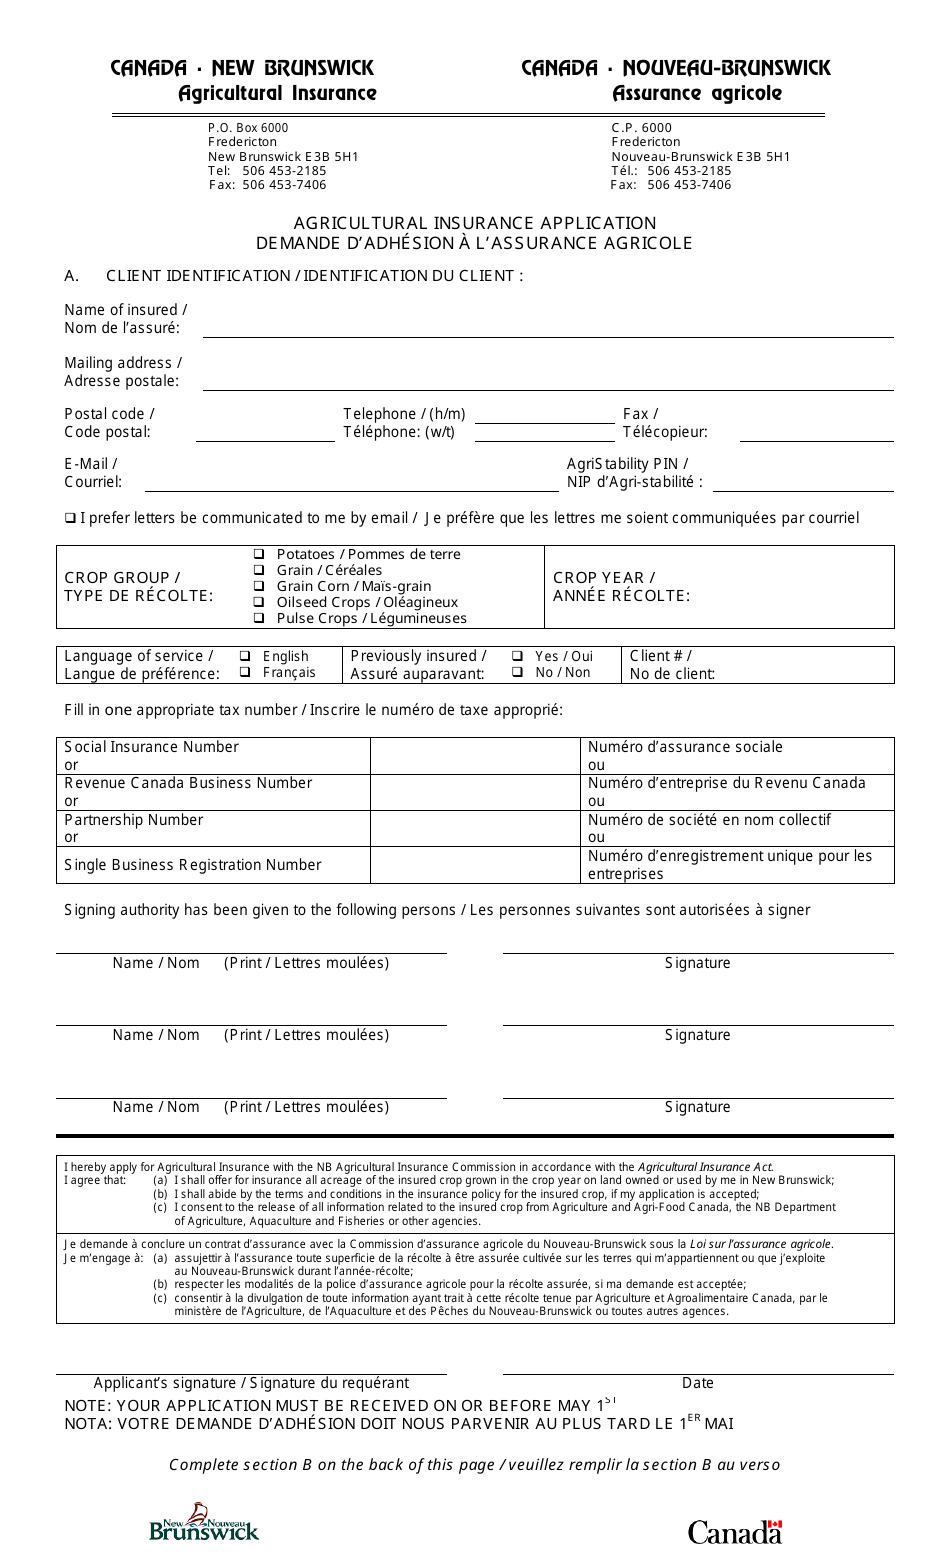 Agricultural Insurance Application (Potatoes / Grain / Grain Corn / Oilseed Crops / Pulse Crops) - New Brunswick, Canada (English / French), Page 1